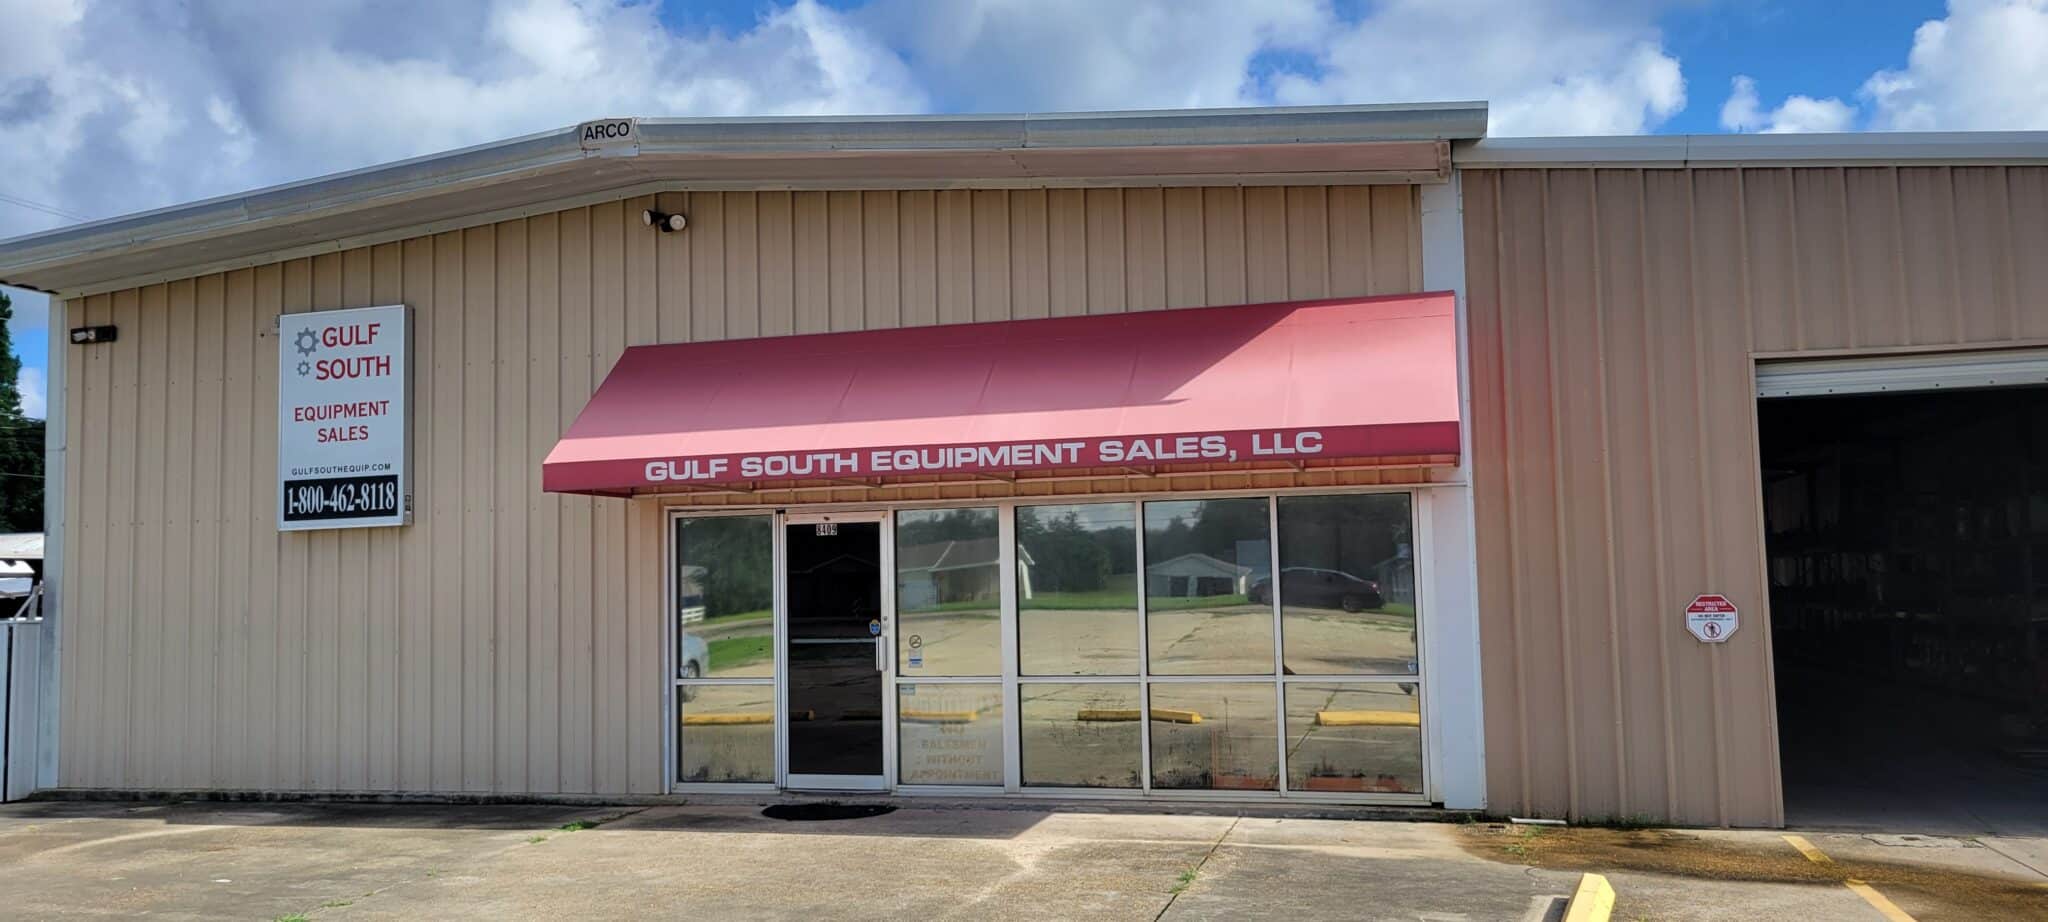 picture of the front of the office building gulf south equipment sales baton rouge louisiana from the parking lot 8409 Hooper road 70811